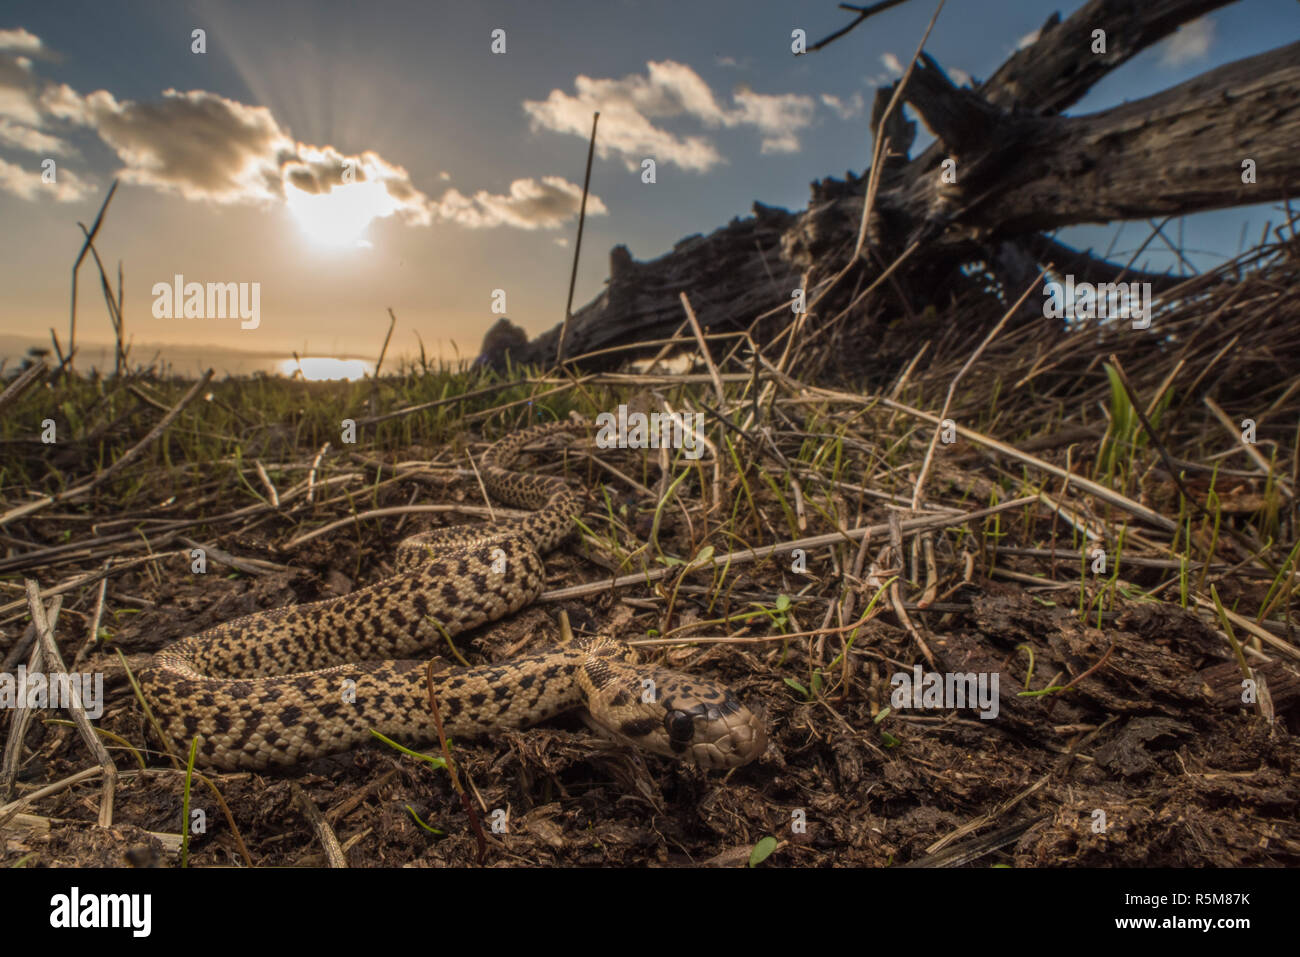 A young Pacific gopher snake (Pituophis catenifer catenifer) on the grassland in the hills above Berkeley, CA. The San Francisco Bay is visible behind. Stock Photo